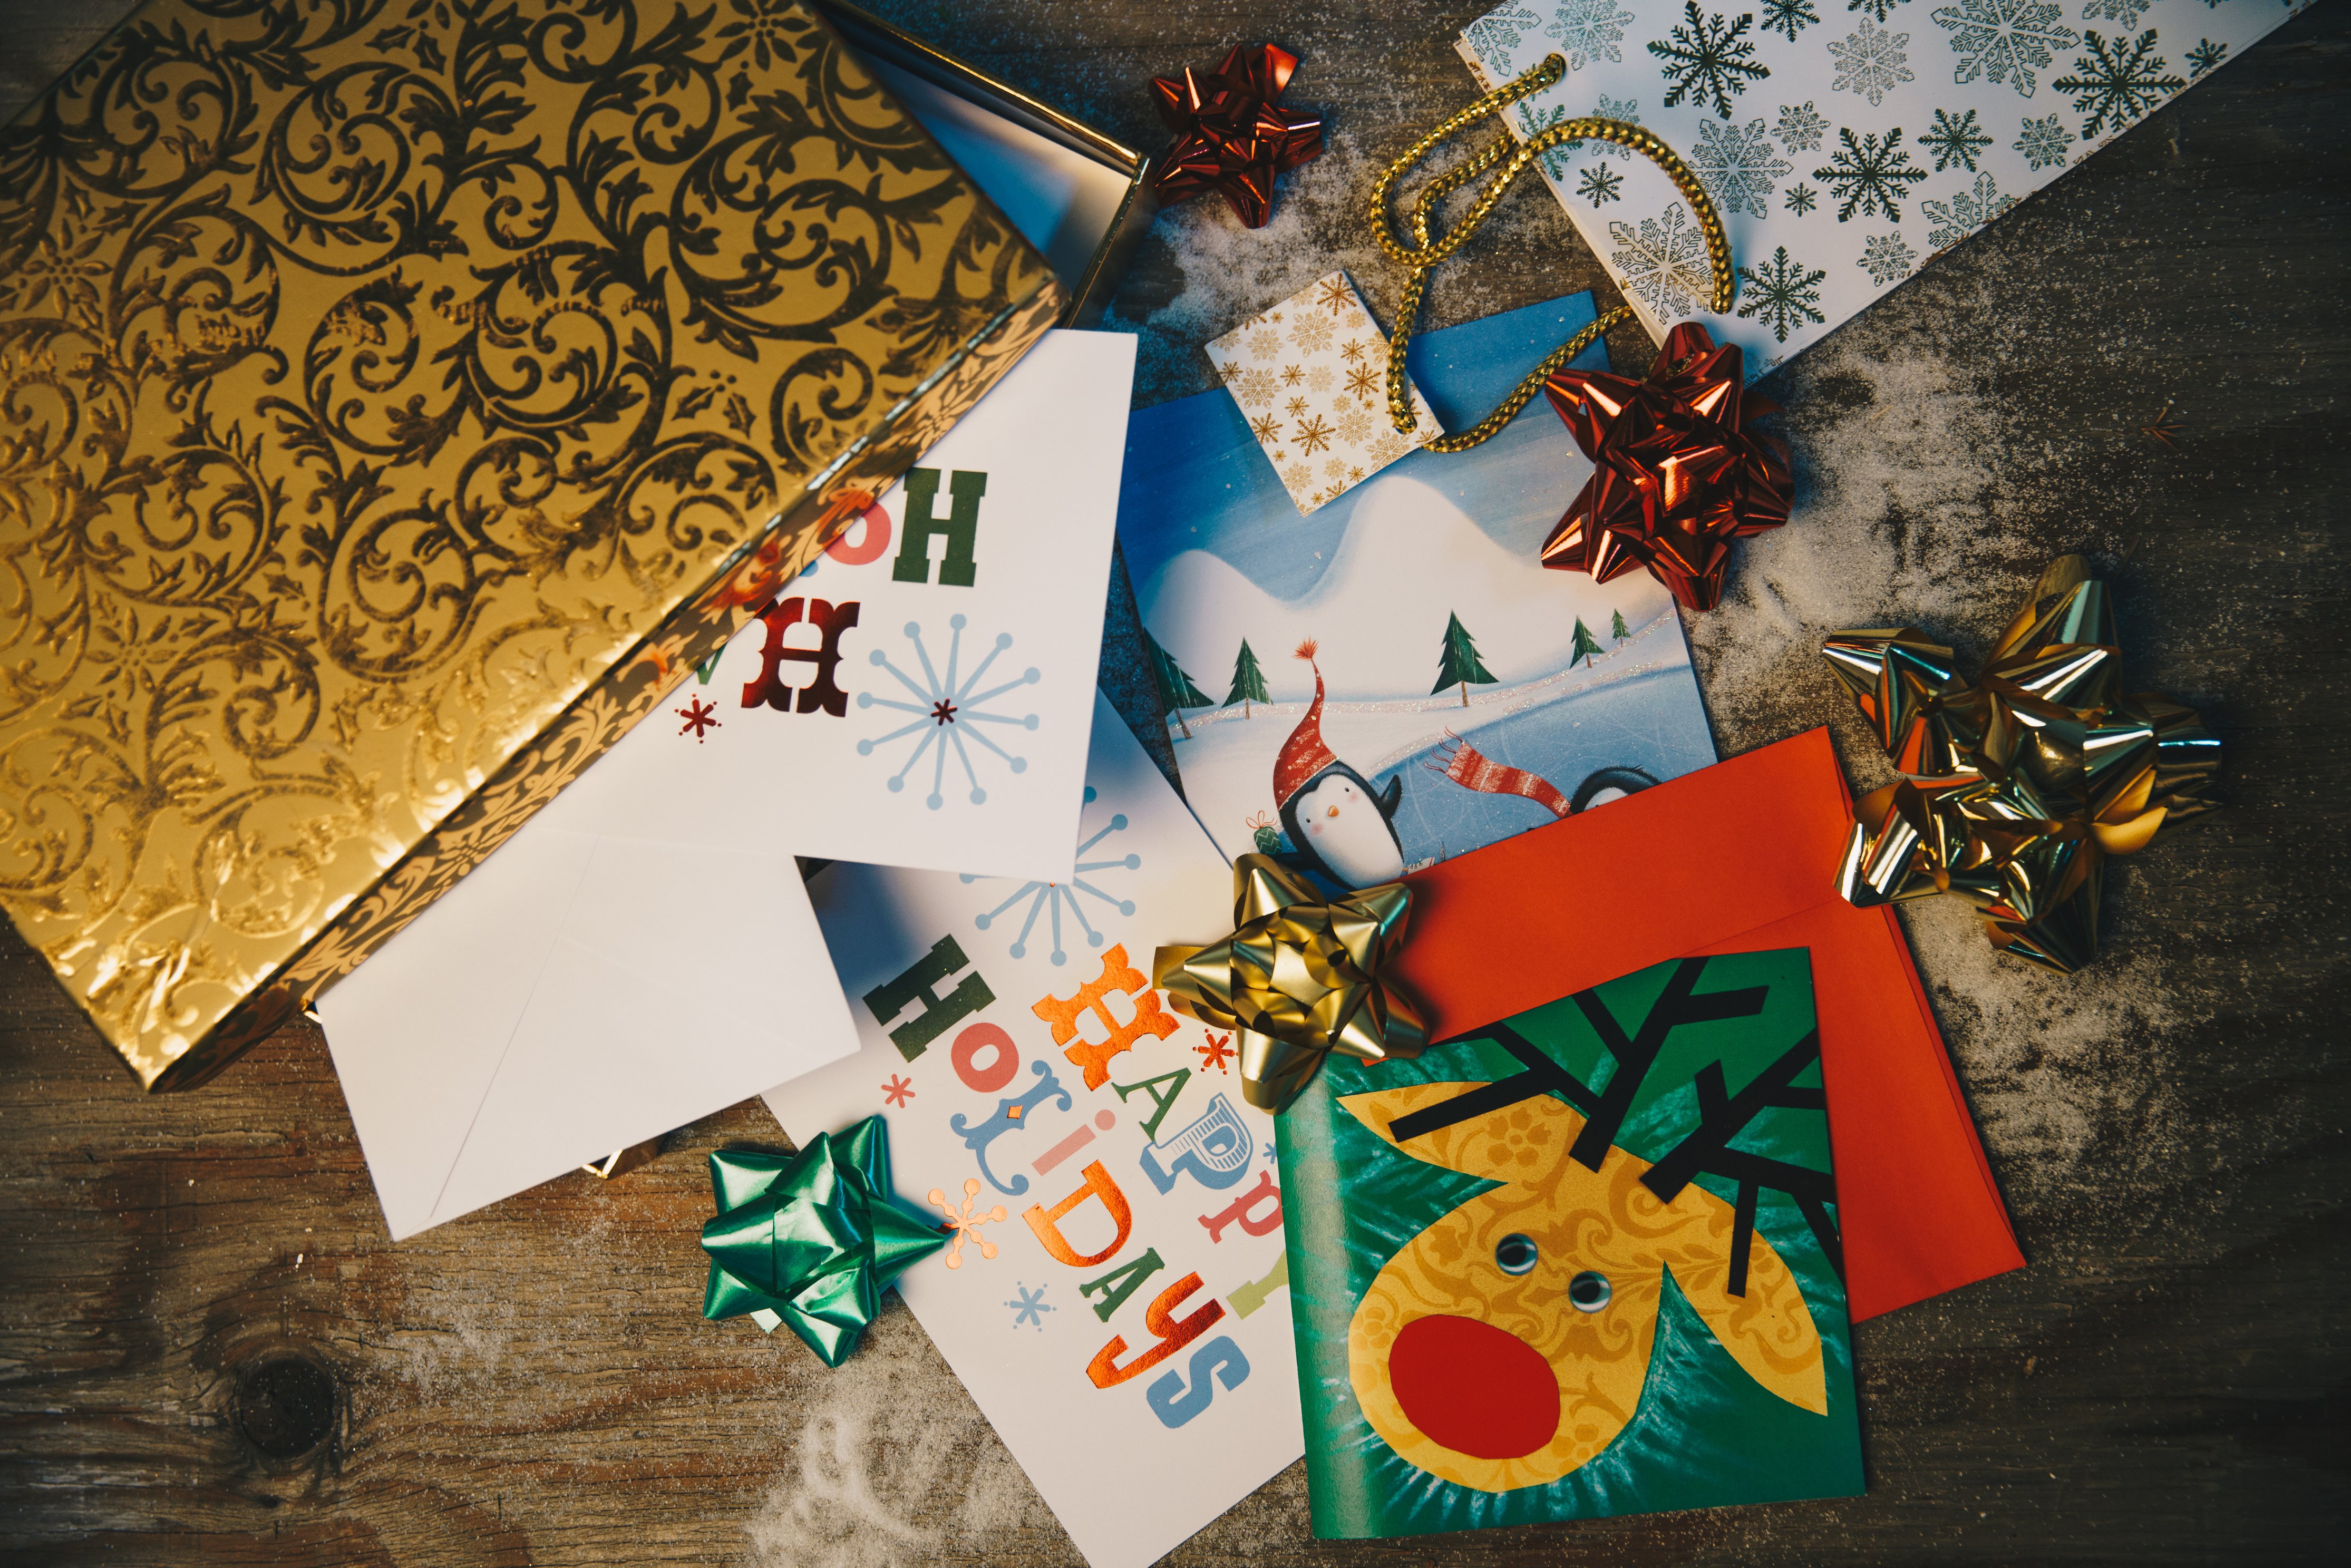 Holiday Stress? How to Maximize Gift Giving